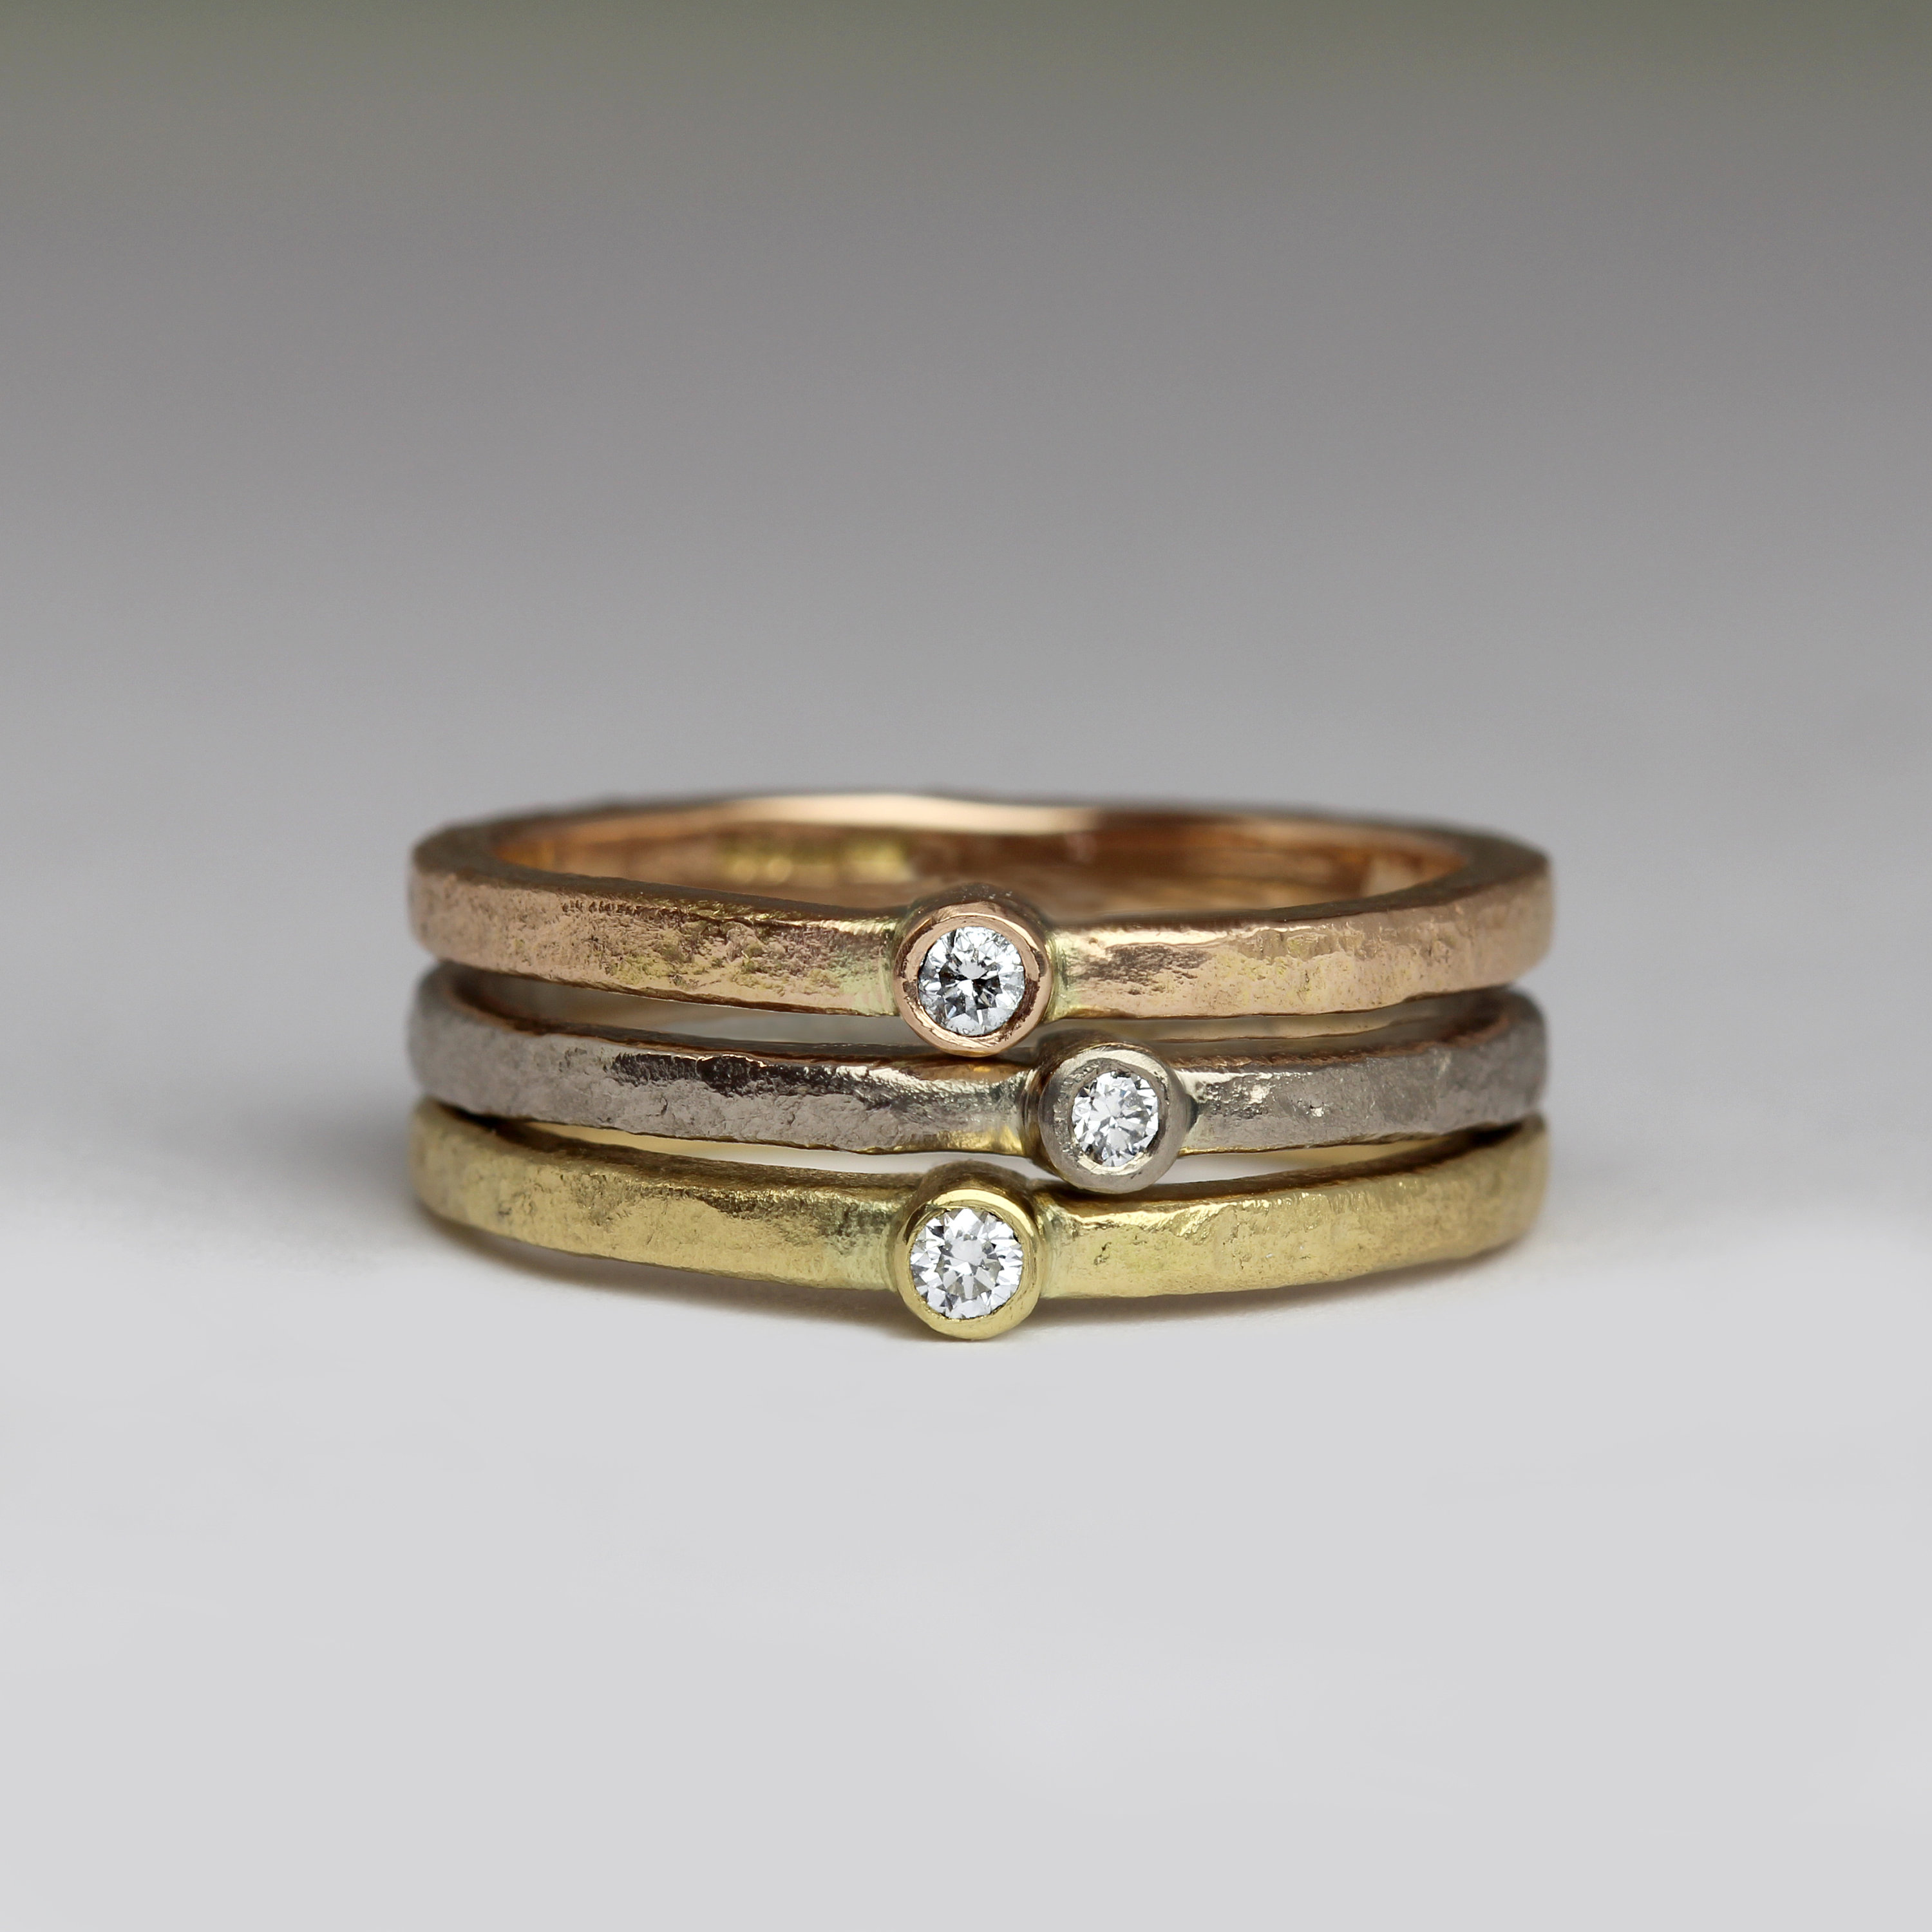 18Ct Gold & Ethical Diamond Stacking Rings - Rustic Texture Cast in Beach Sand Multi-Coloured Minimalist Handmade Cornwall